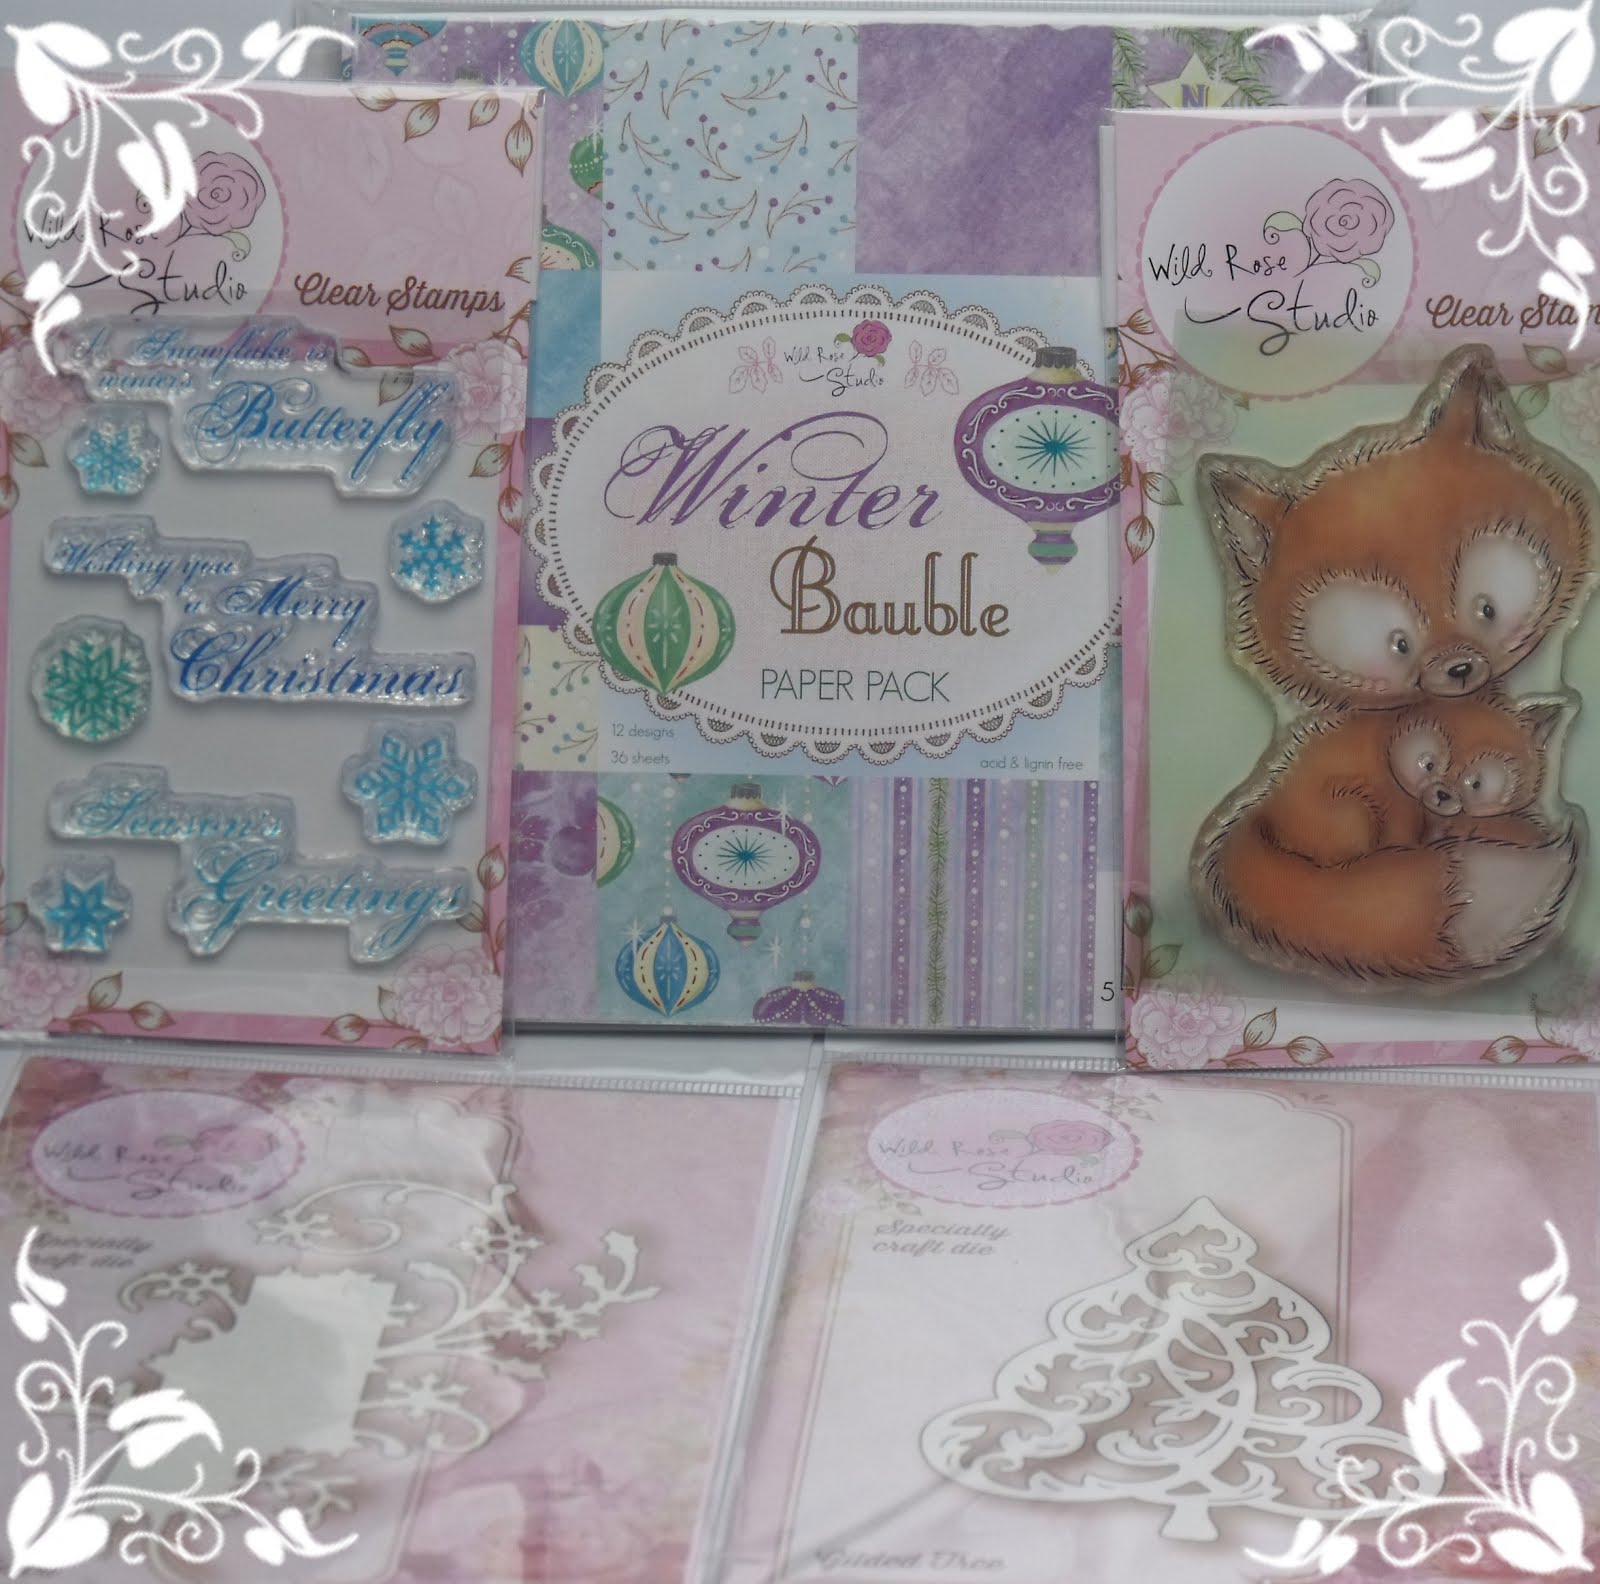 Down Right Crafty & Wild Rose Studio Blog Candy